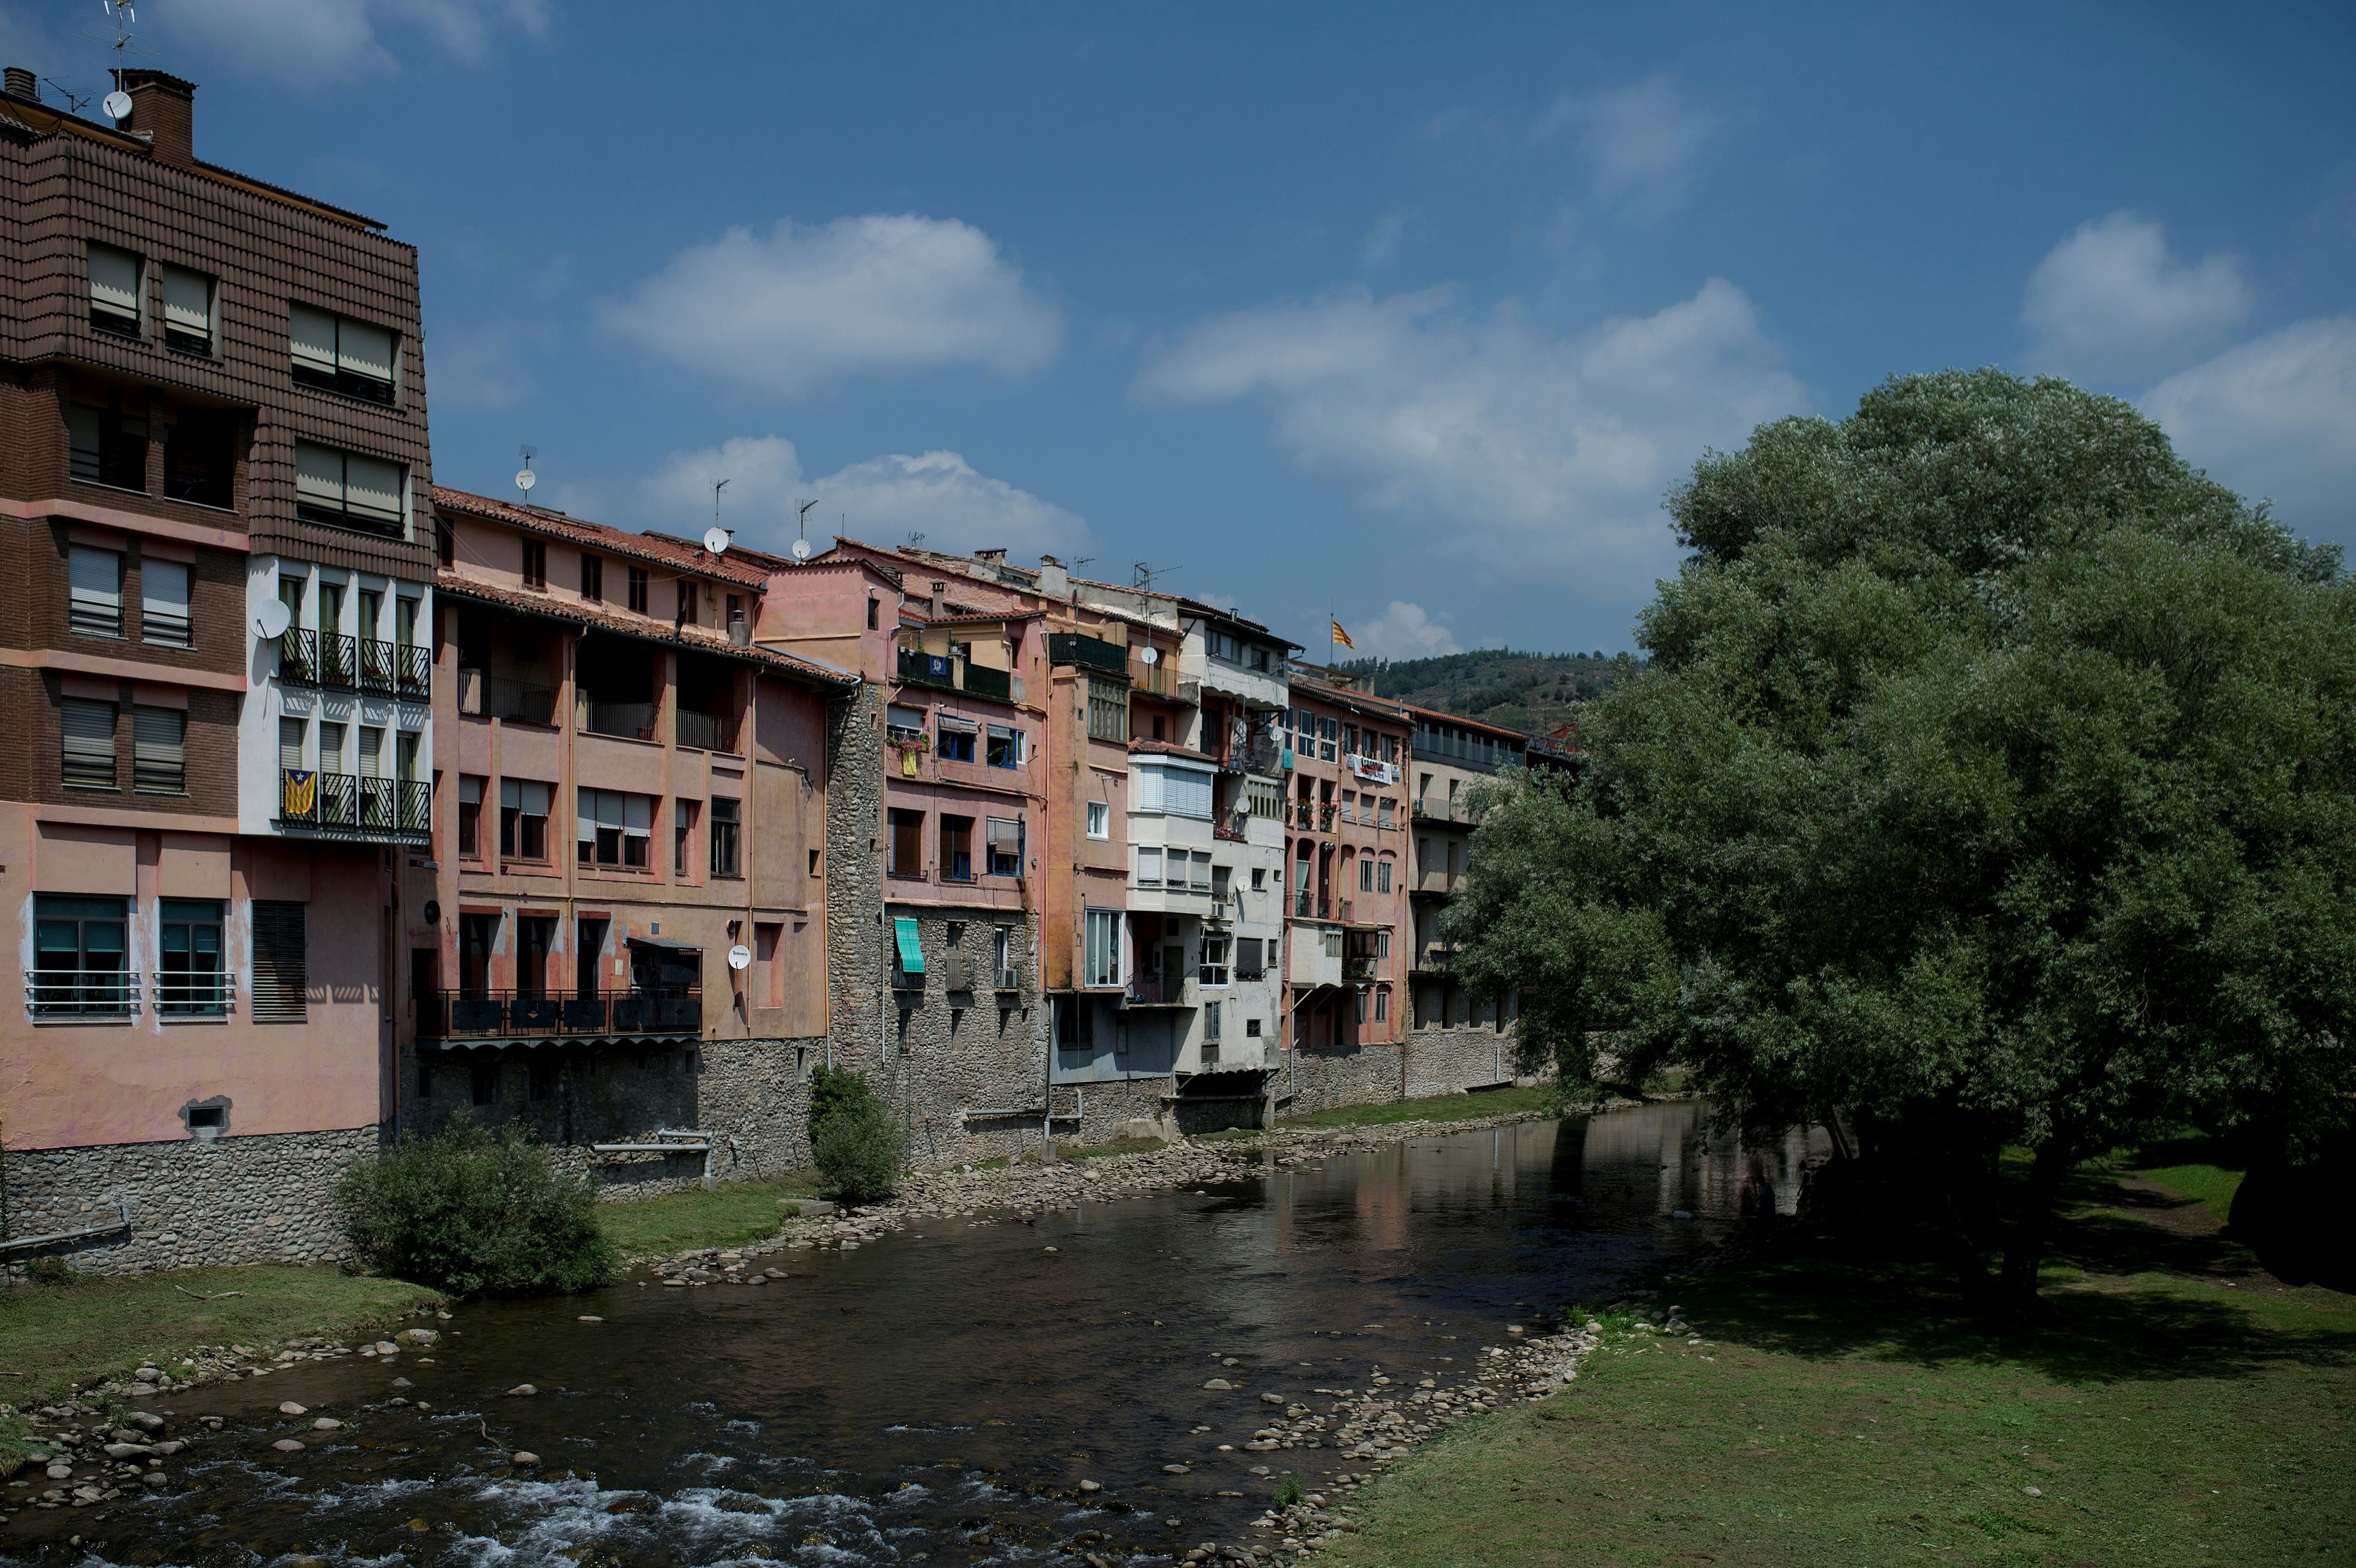 The Ter river flows along the Spanish town of Ripoll on August 9, 2018. - August 17 last year a van rammed into crowds on Las Ramblas boulevard in the heart of Barcelona, igniting four days of terror which investigators are still trying to explain and the survivors to overcome. (Photo by Josep LAGO / AFP)        (Photo credit should read JOSEP LAGO/AFP/Getty Images)